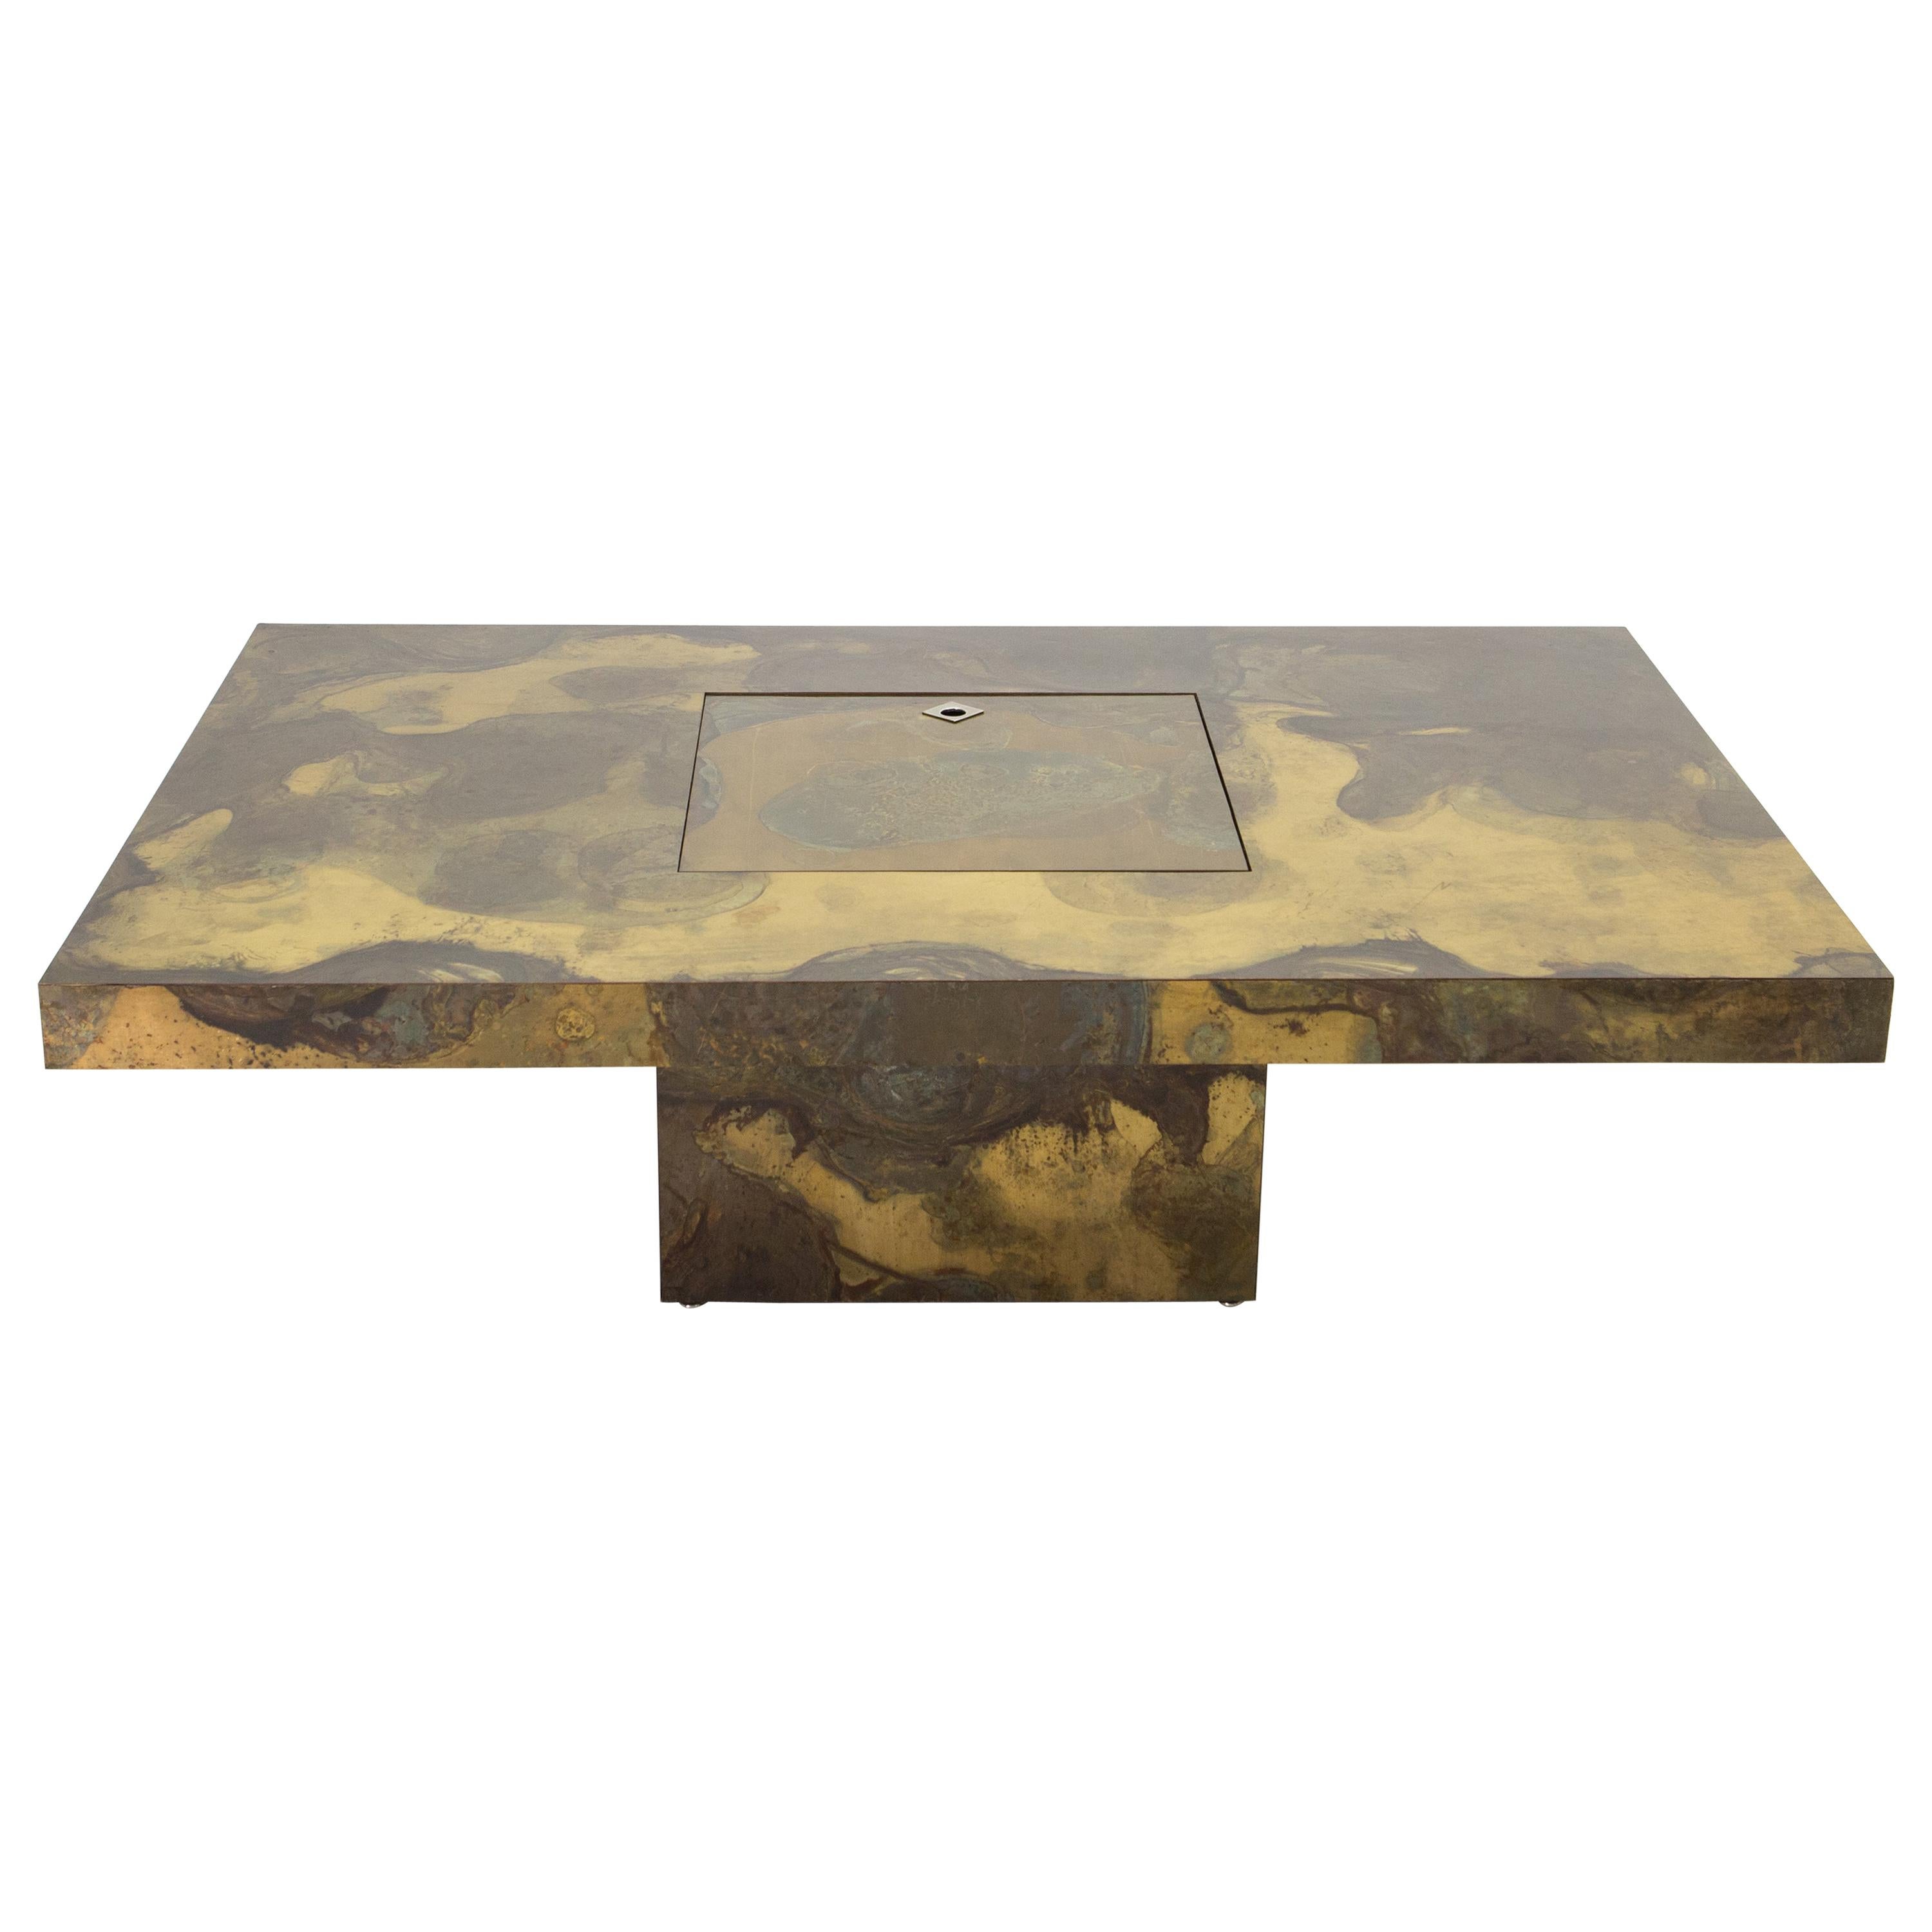 Unique Isabelle and Richard Faure Brass Coffee Table, 1970s